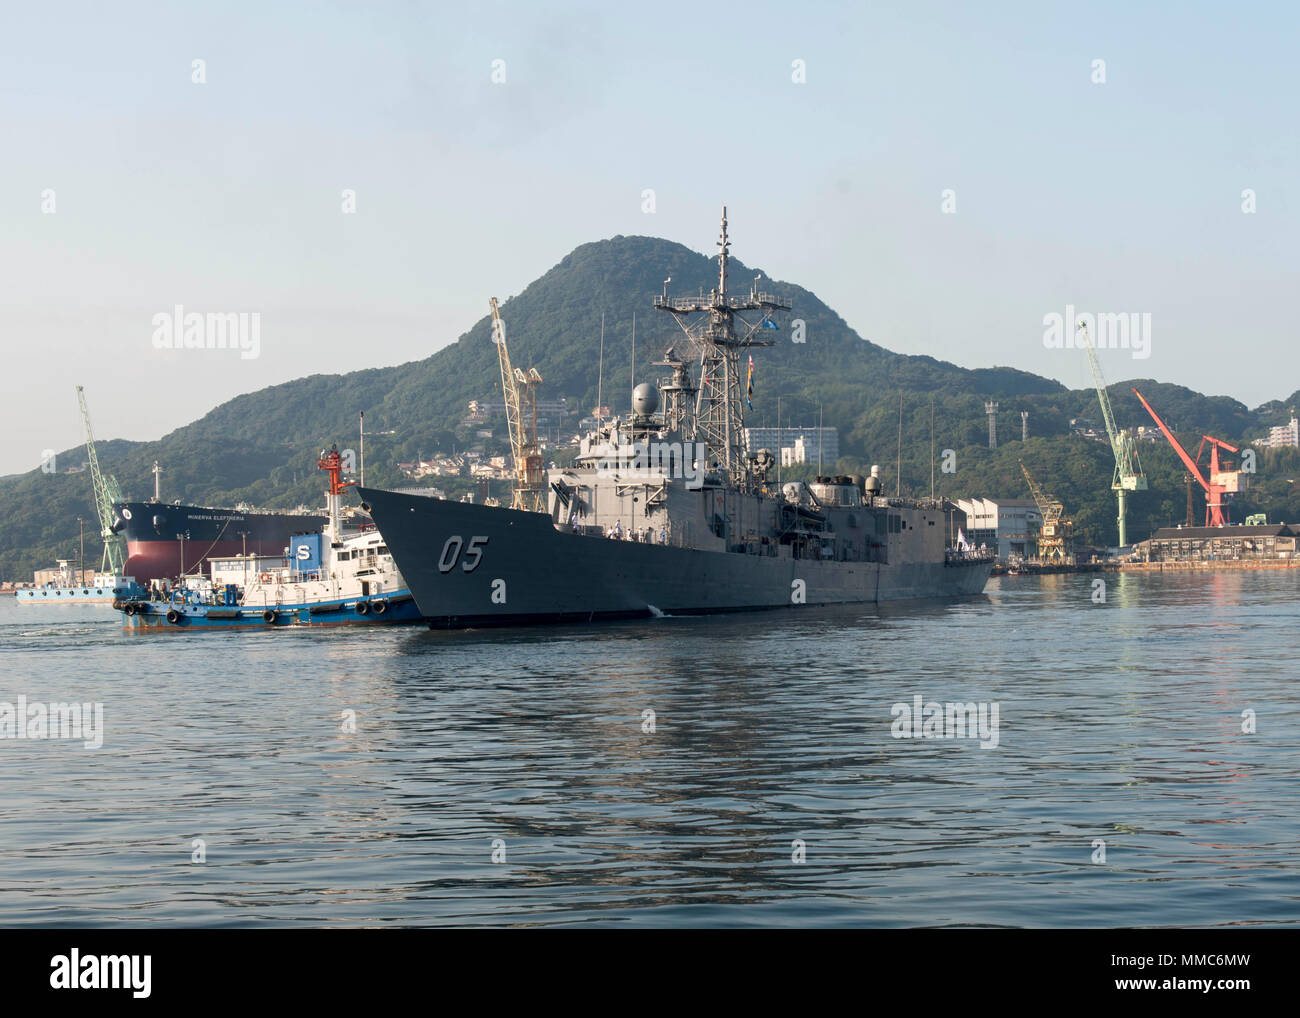 171008-N-RY519-0010 SASEBO, Japan (Oct. 9, 2017) Royal Australian Navy Adelaide-class guided-missile frigate HMAS Melbourne (FFG 05) arrives at Fleet Activities Sasebo for a routine port visit. (U.S. Navy photo by Mineman 3rd Class Zachary S. Horvath/Released) Stock Photo